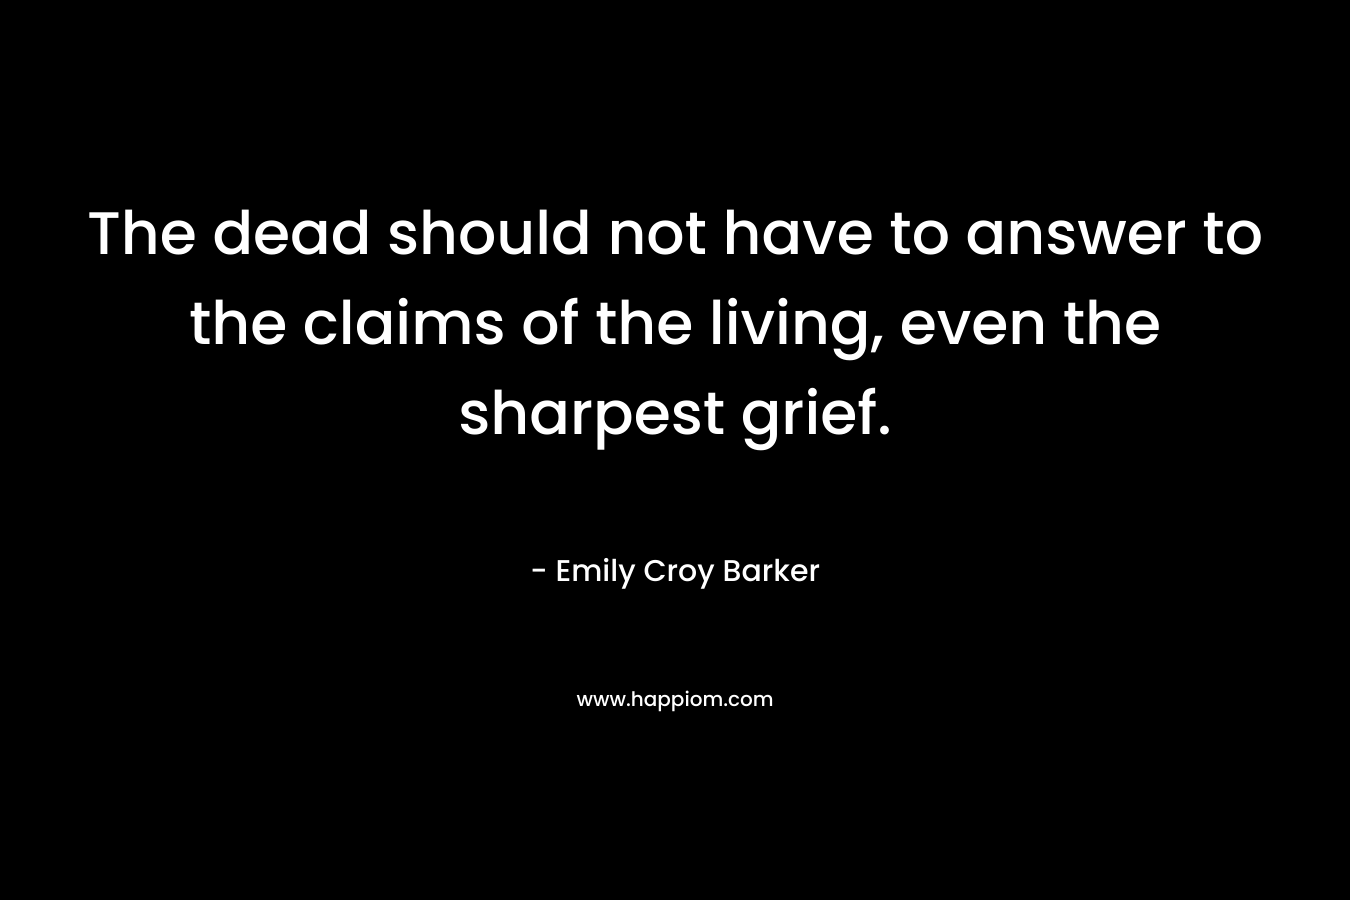 The dead should not have to answer to the claims of the living, even the sharpest grief. – Emily Croy Barker